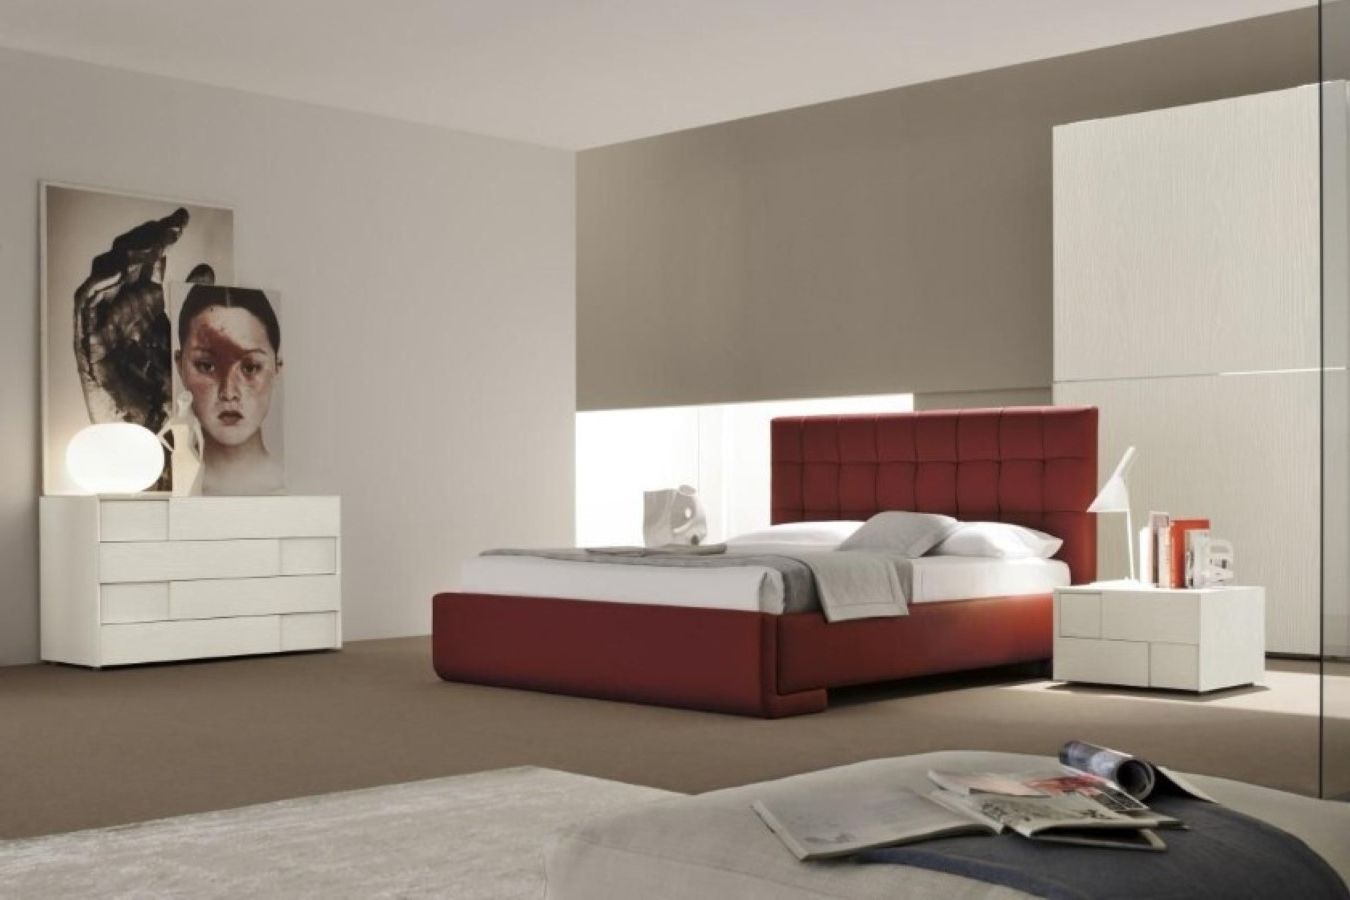 Unique Table Lamp Design And Modern Bedroom Set With Red Platform Bed Plus White Cabinets Idea (Photo 3110 of 7825)